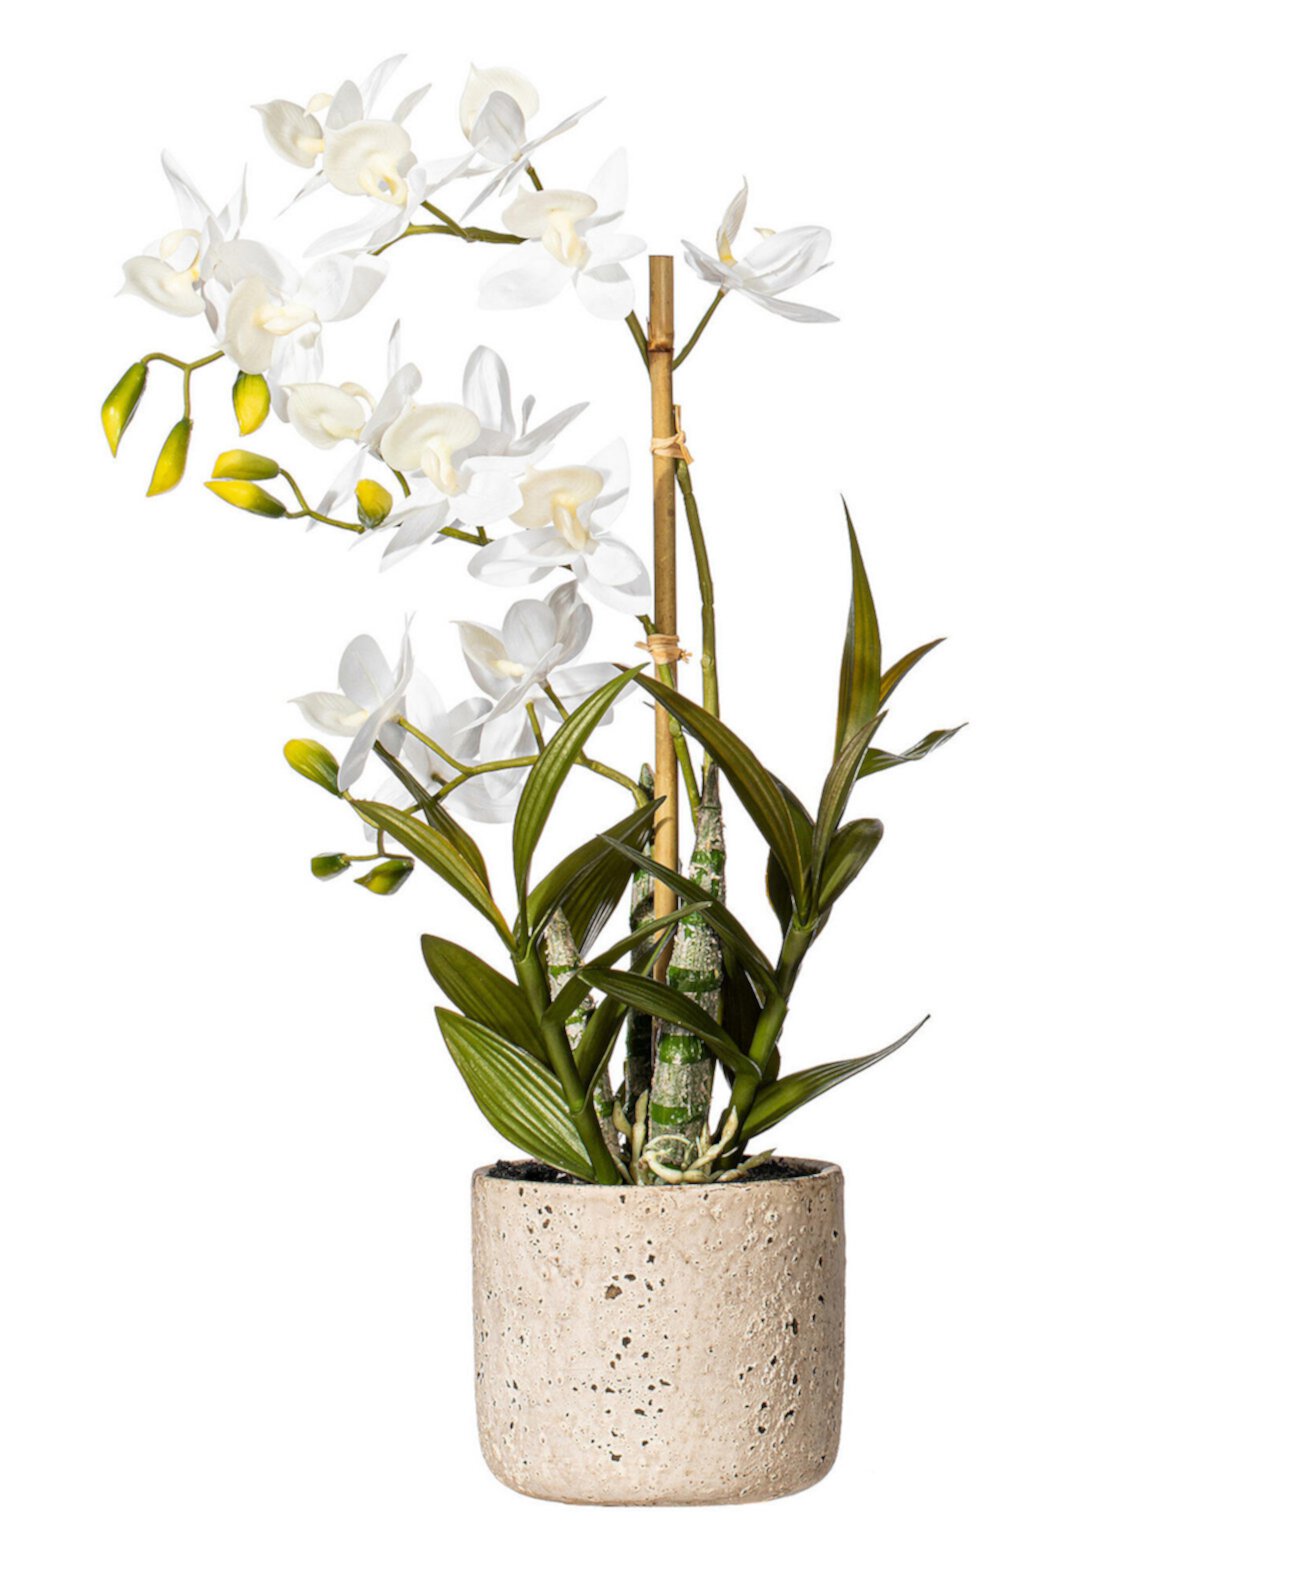 19" Artificial White Deluxe Potted Cycnoches Orchid. Vickerman